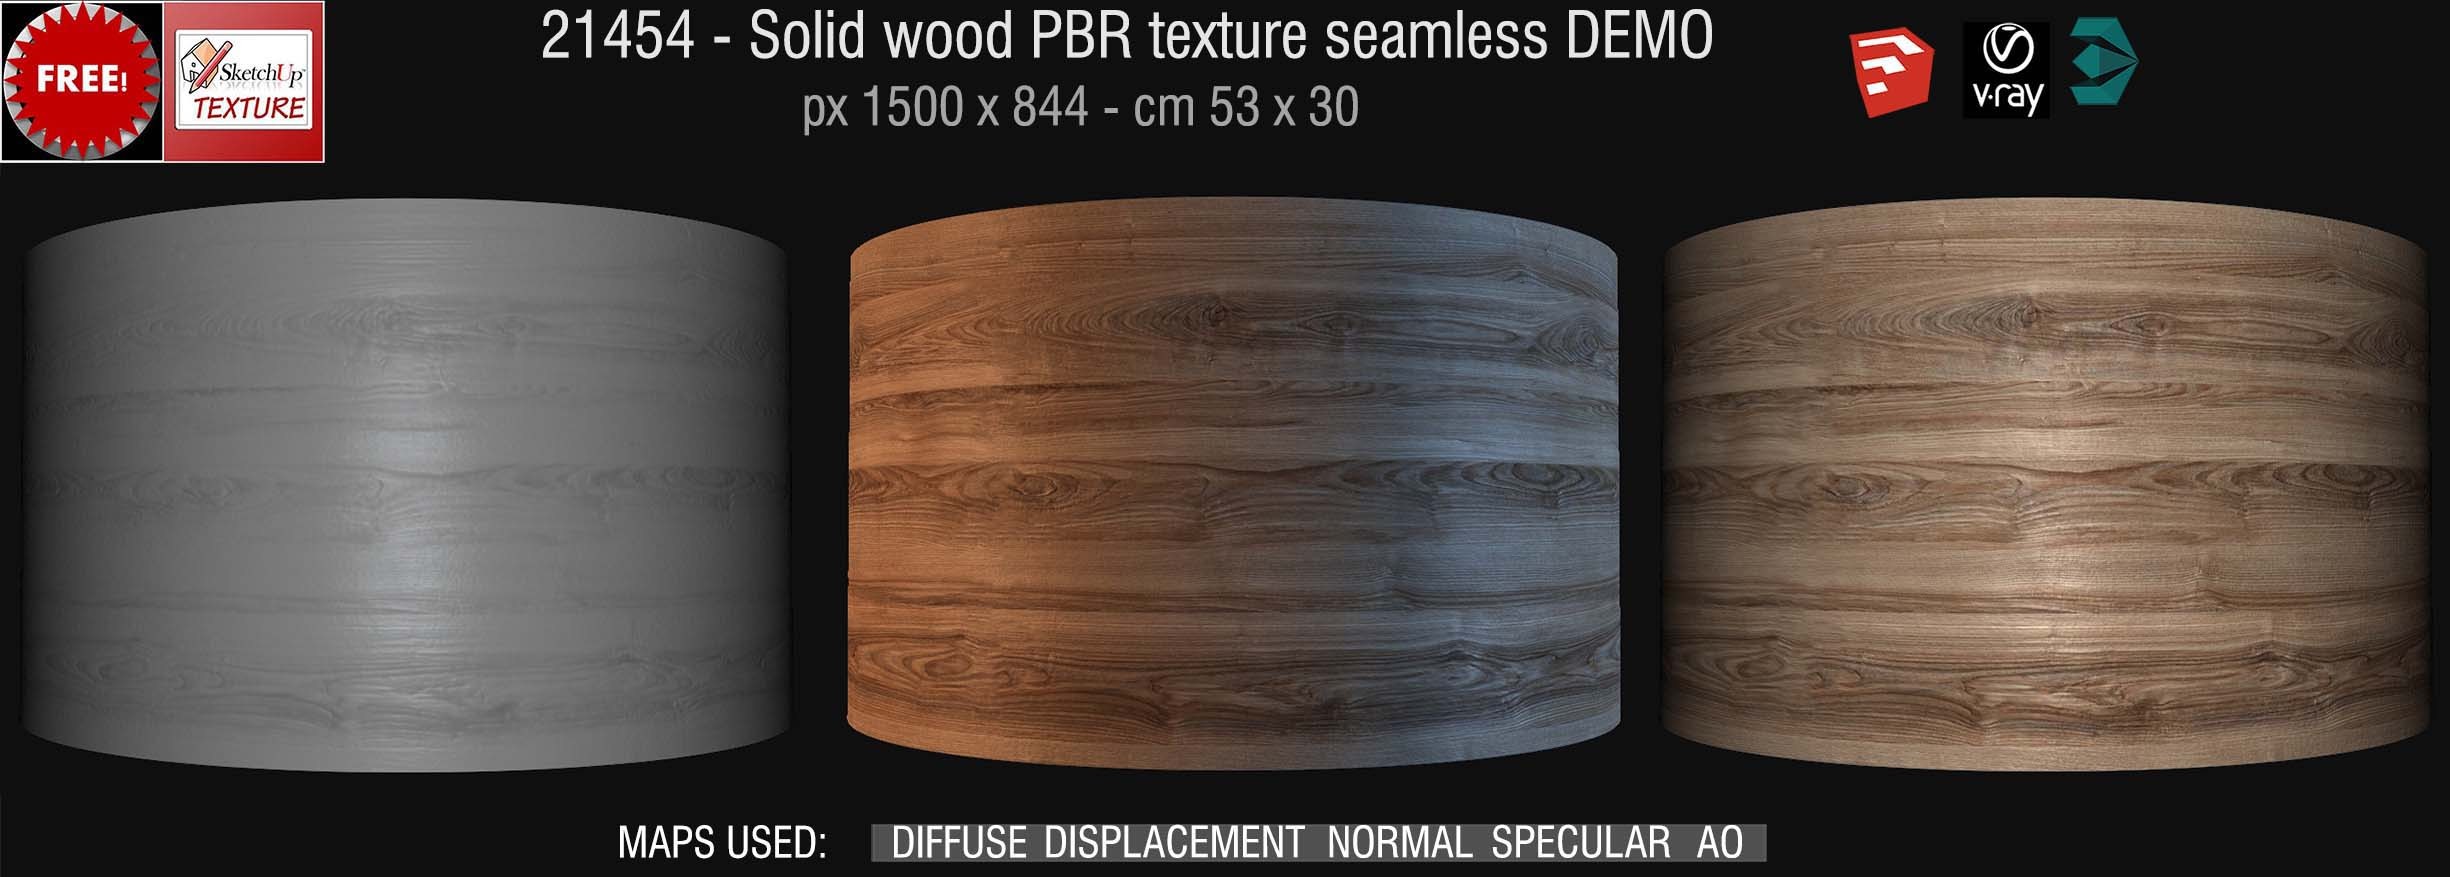 21454 Solid wood PBR texture seamless DEMO